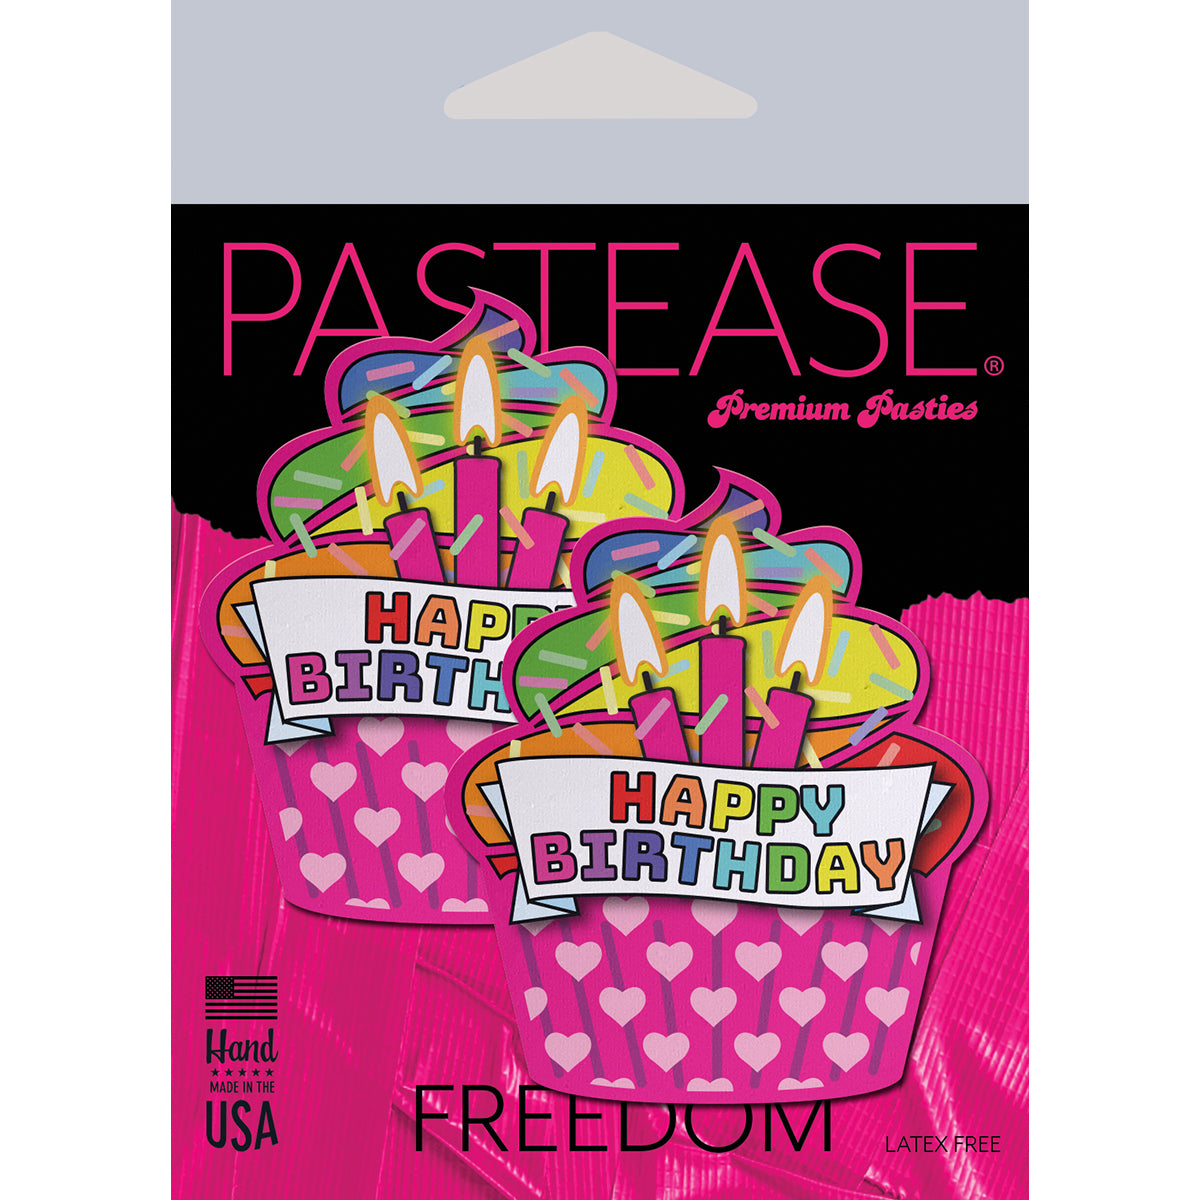 Pastease Happy Birthday Cupcakes Intimates Adult Boutique